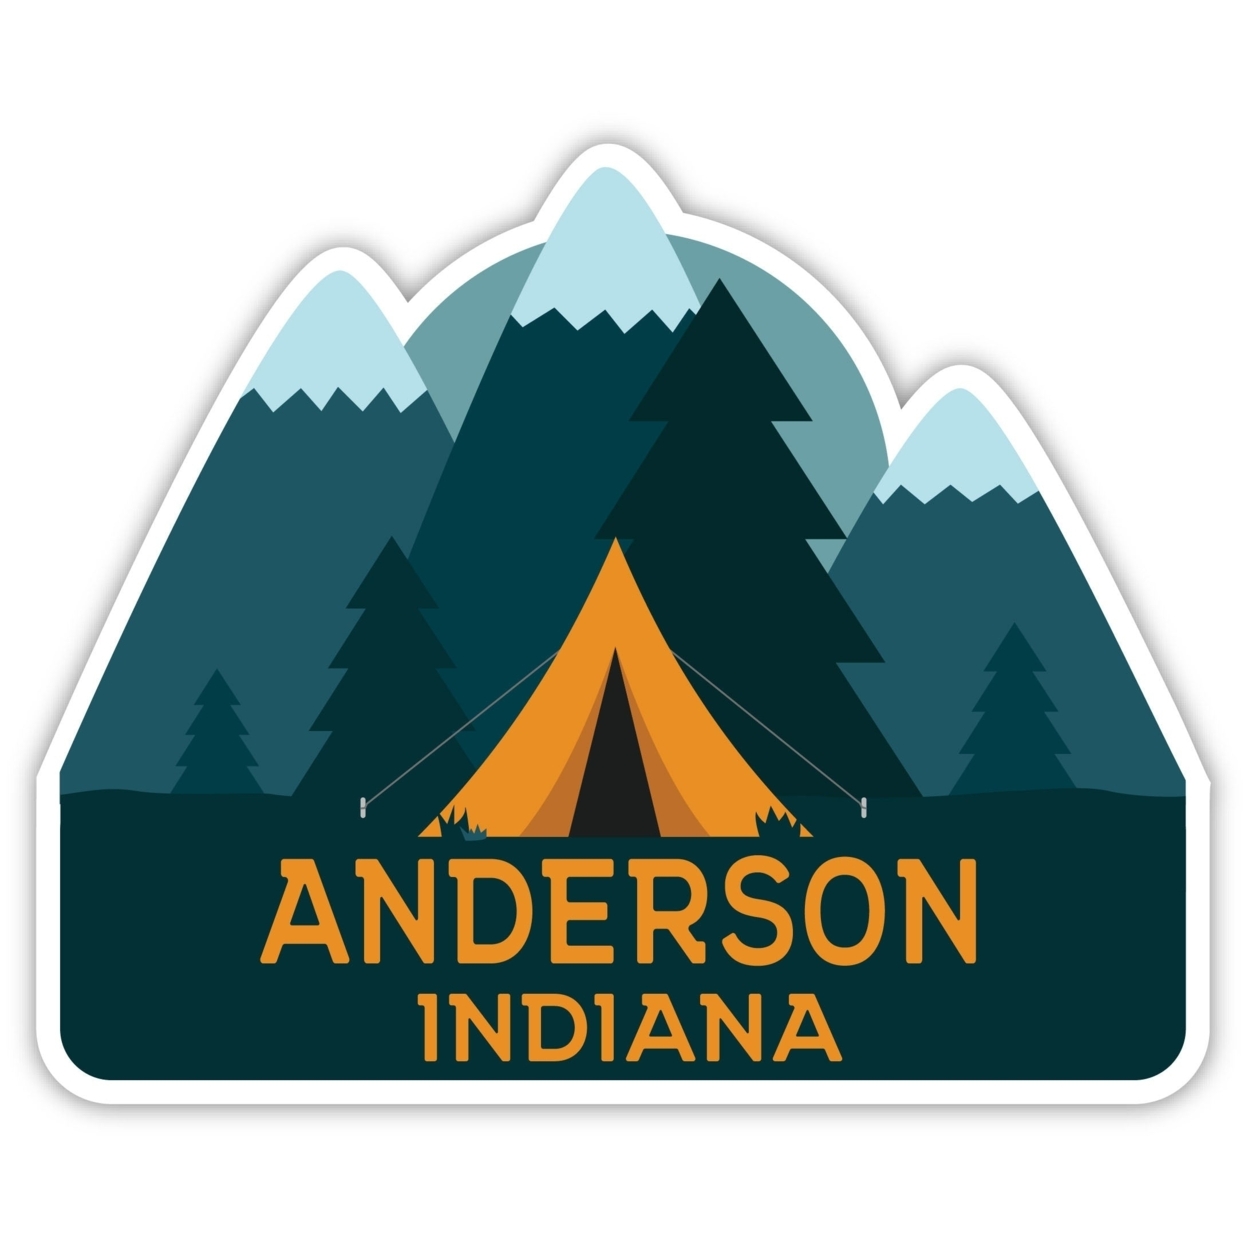 Anderson Indiana Souvenir Decorative Stickers (Choose Theme And Size) - 4-Pack, 12-Inch, Tent